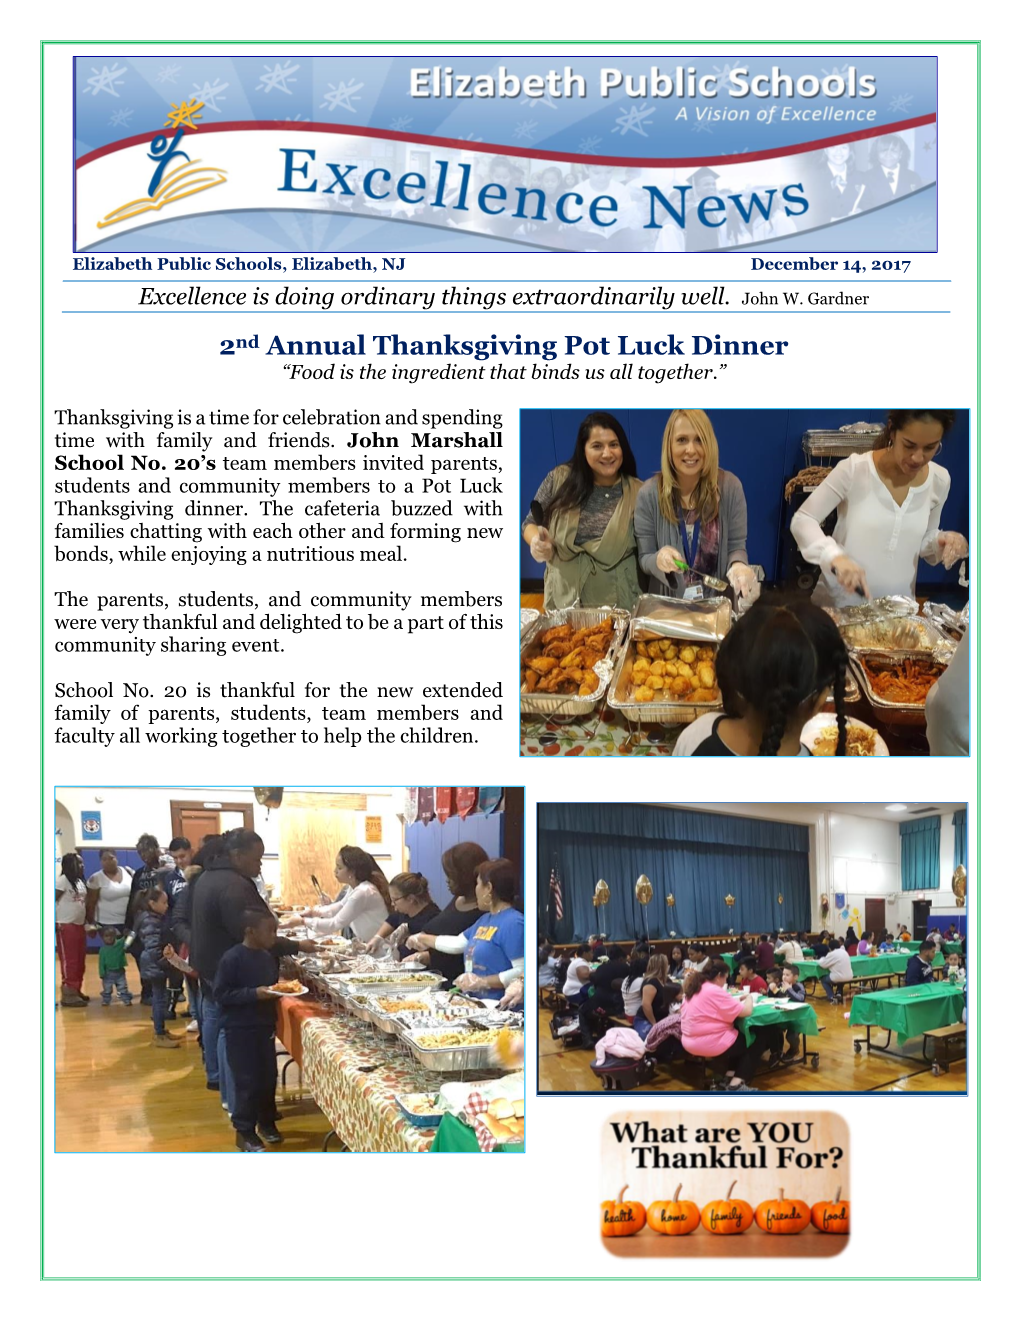 2Nd Annual Thanksgiving Pot Luck Dinner “Food Is the Ingredient That Binds Us All Together.”